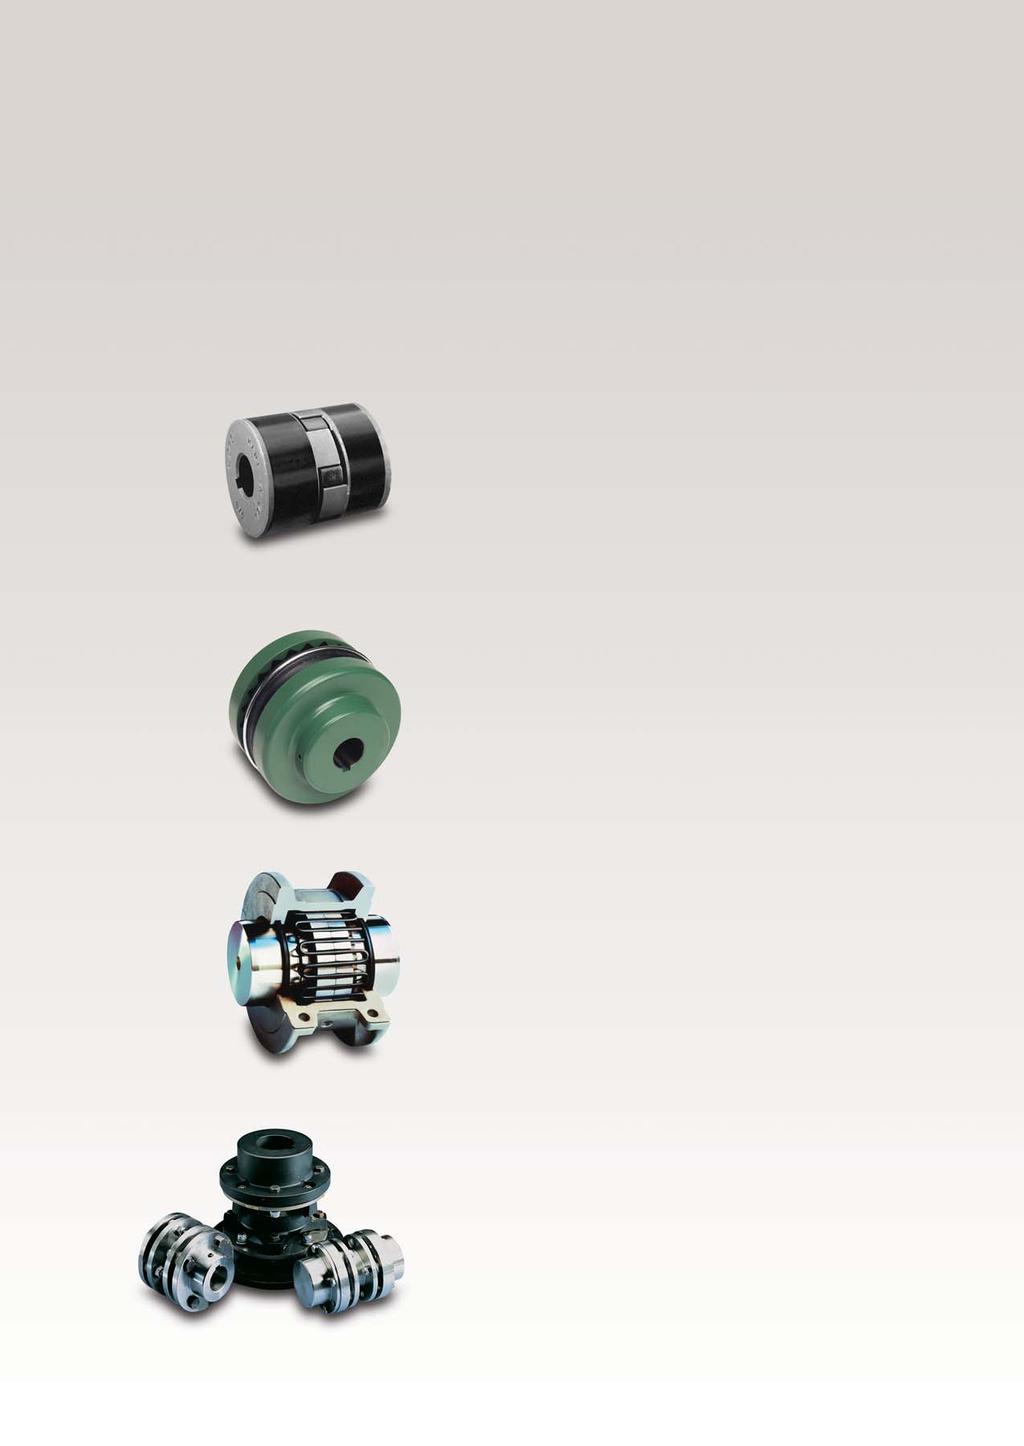 T Wood s offers a wide range of couplings for industrial applications For over 70 years, T Wood s has been designing and manufacturing innovative coupling solutions to meet the requirements for a